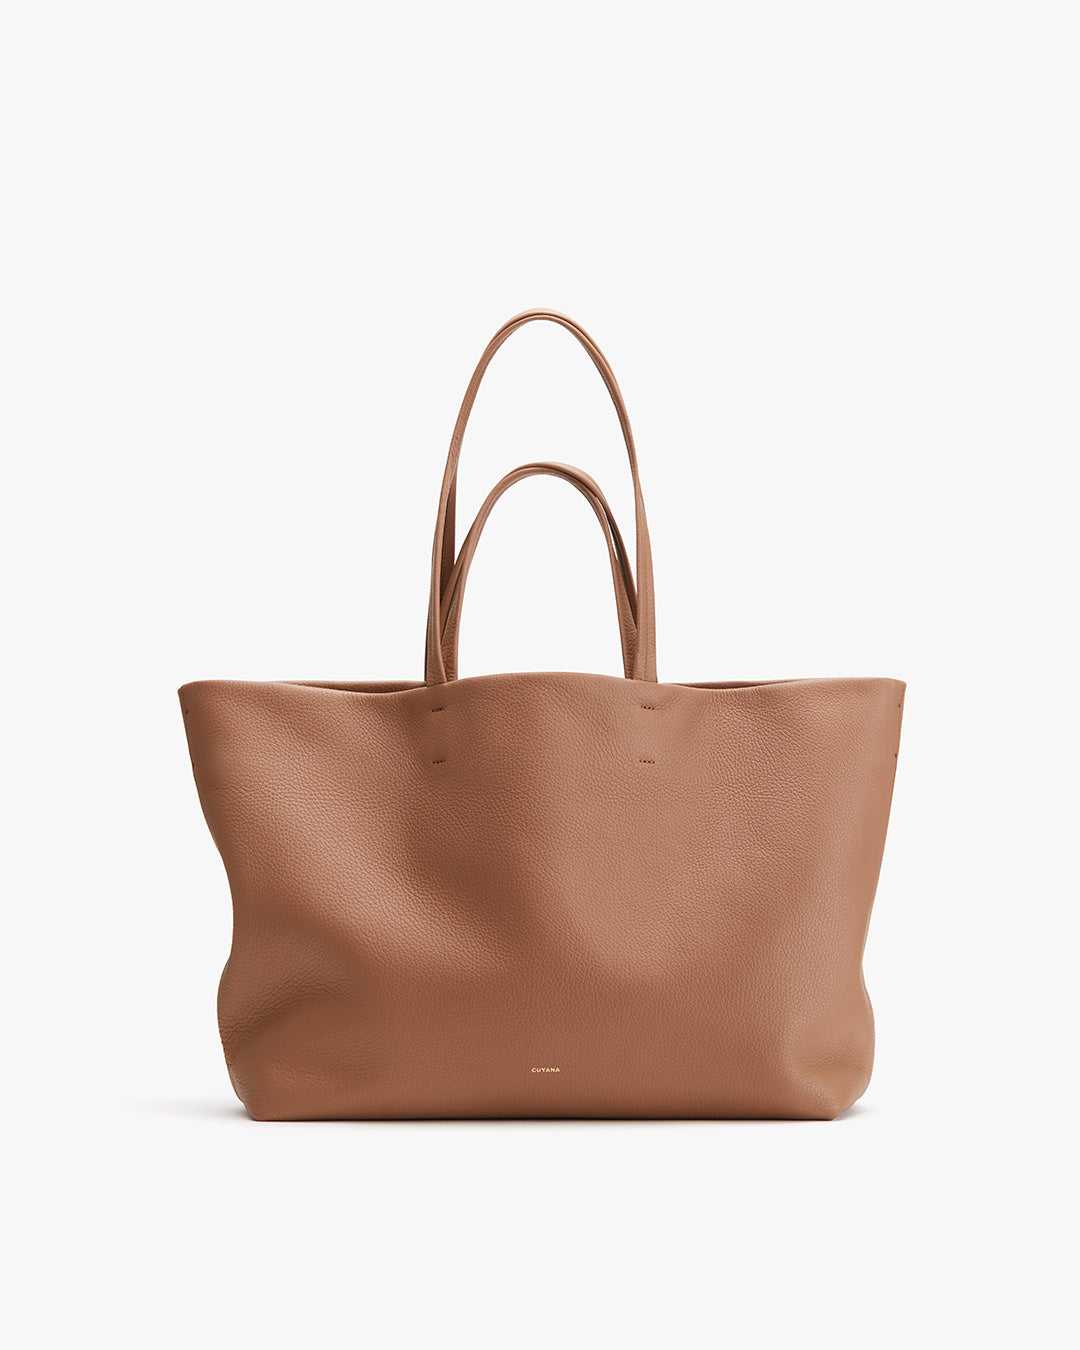 Cuyana Easy Tote Bag in Italian Pebbled Leather, Brown | Women's Work & Travel Totes